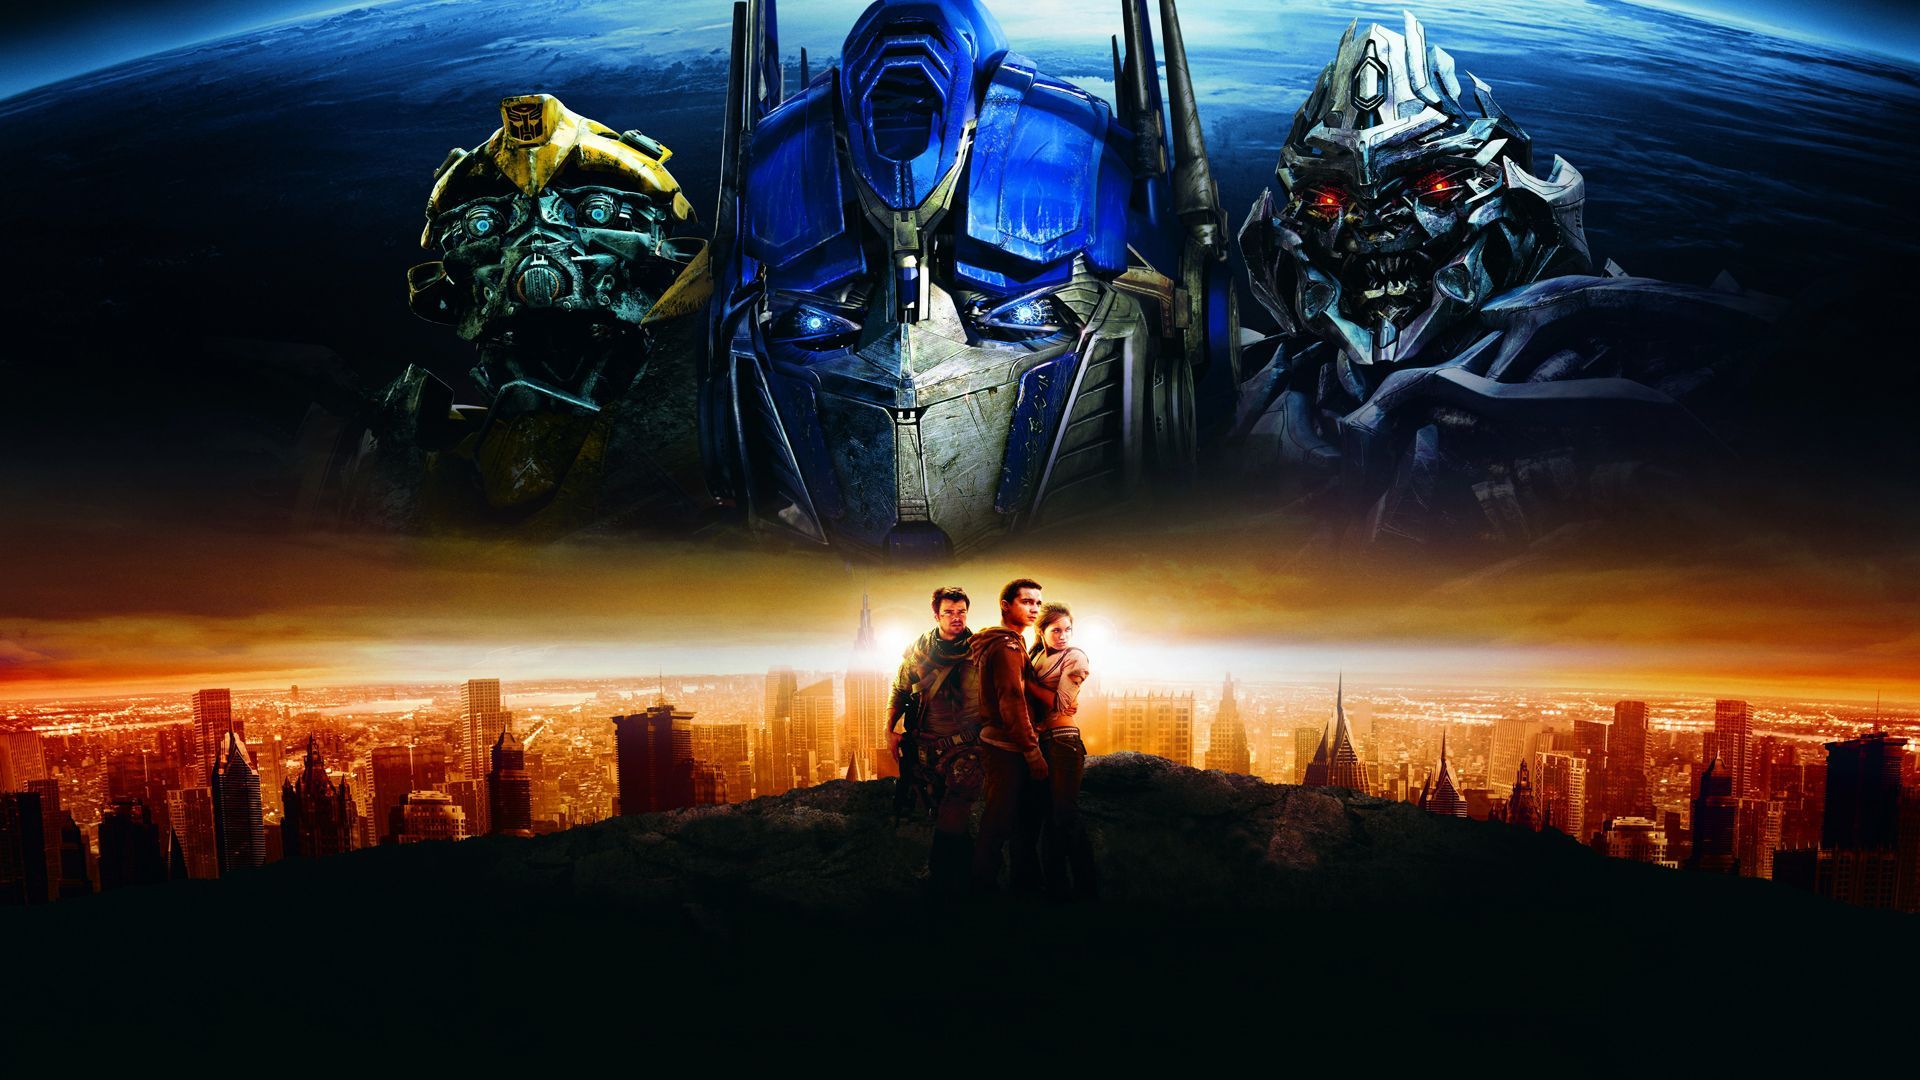 Transformers 2 Wallpaper Free Transformers 2 Background